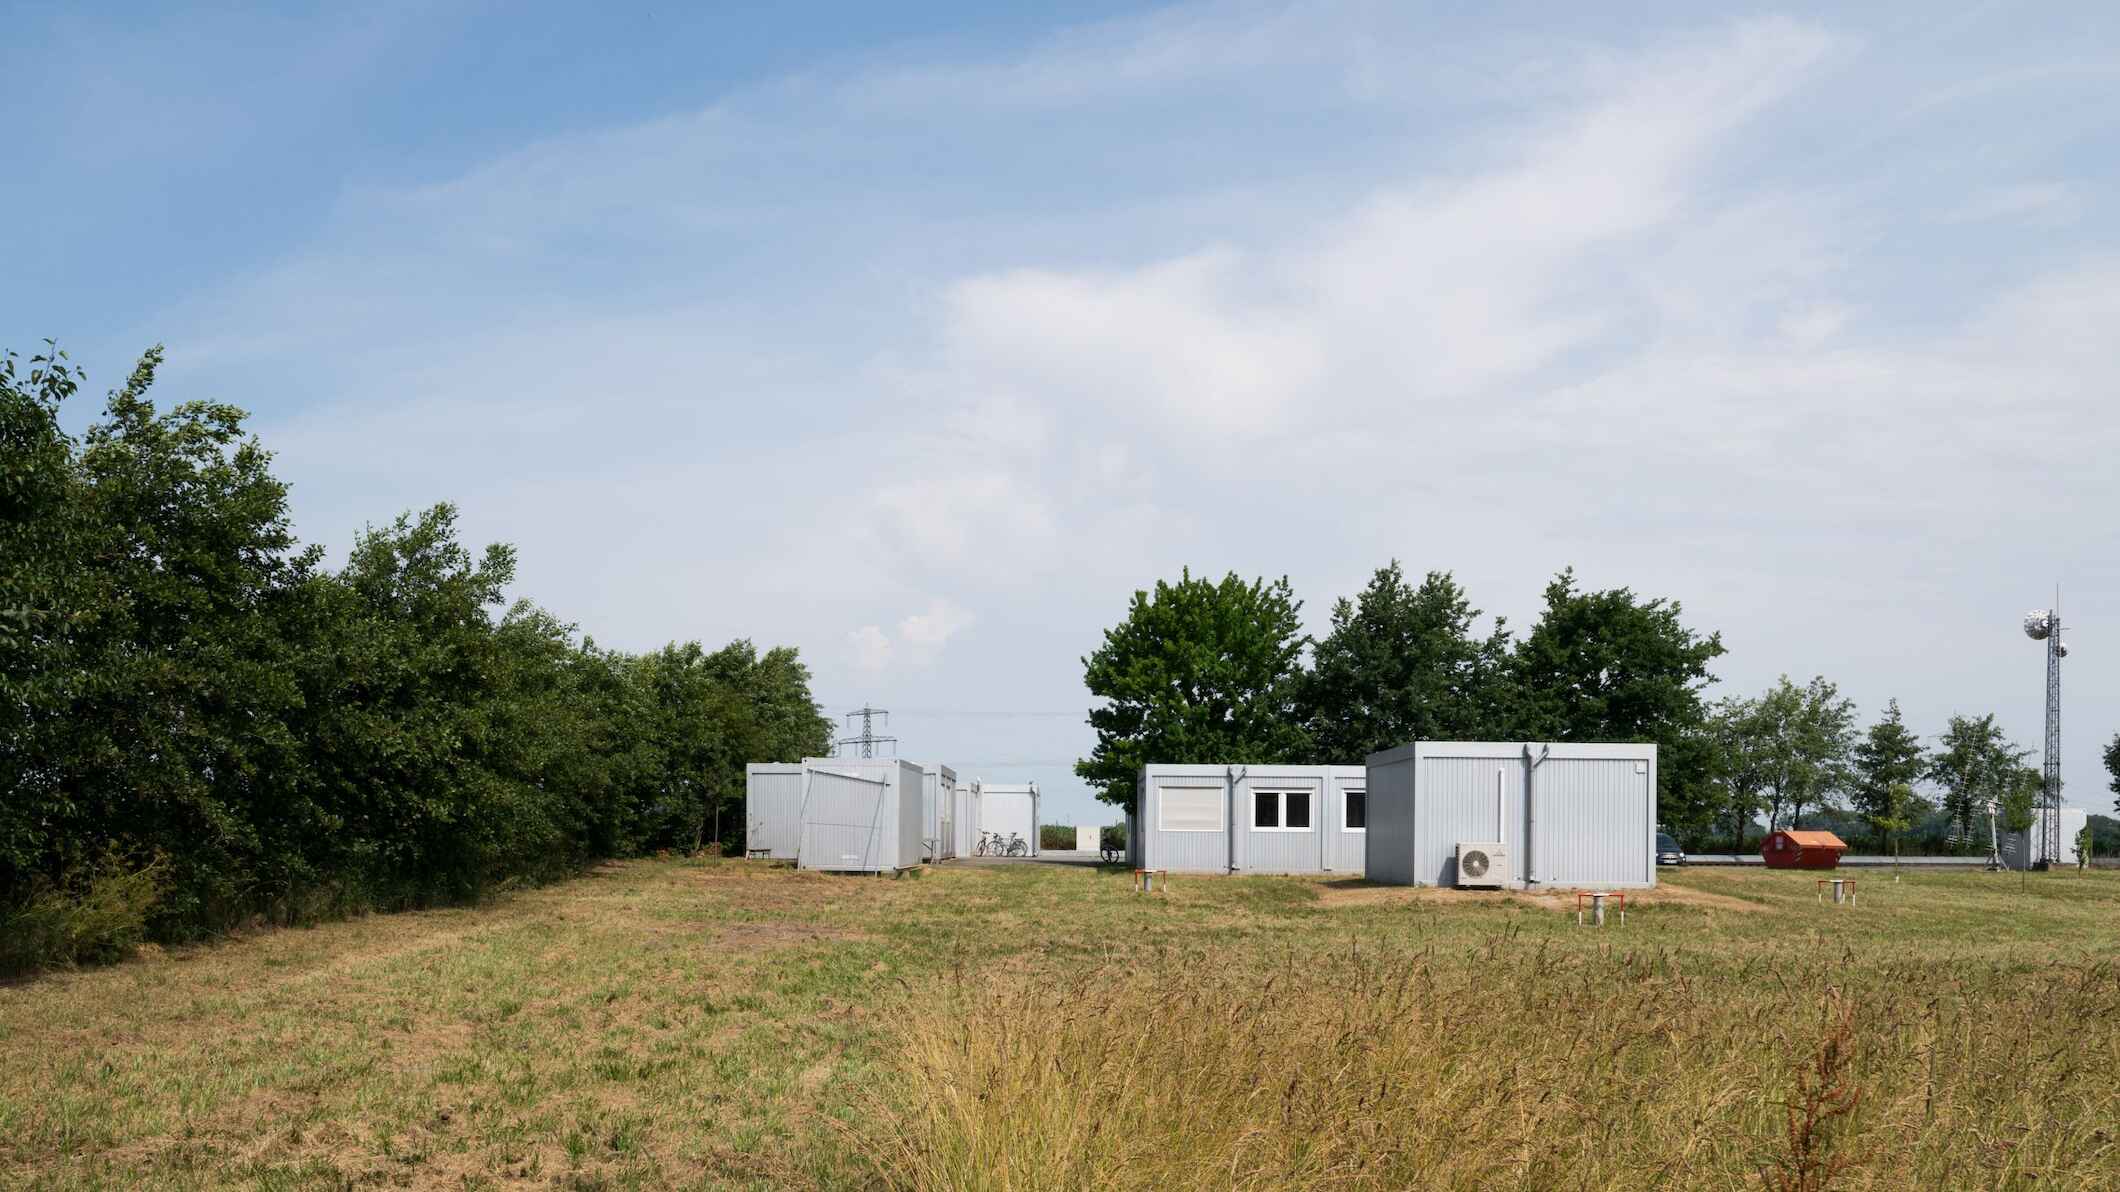 The GEO600 gravitational wave detector near the village of Ruthe close to Hannover. The researchers work in the containers. The laser’s measurement beams pass through two 600 meter long vacuum tubes. GEO600 is particularly sensitive for waves from the explosions of supernovae and the mergers of neutron stars.